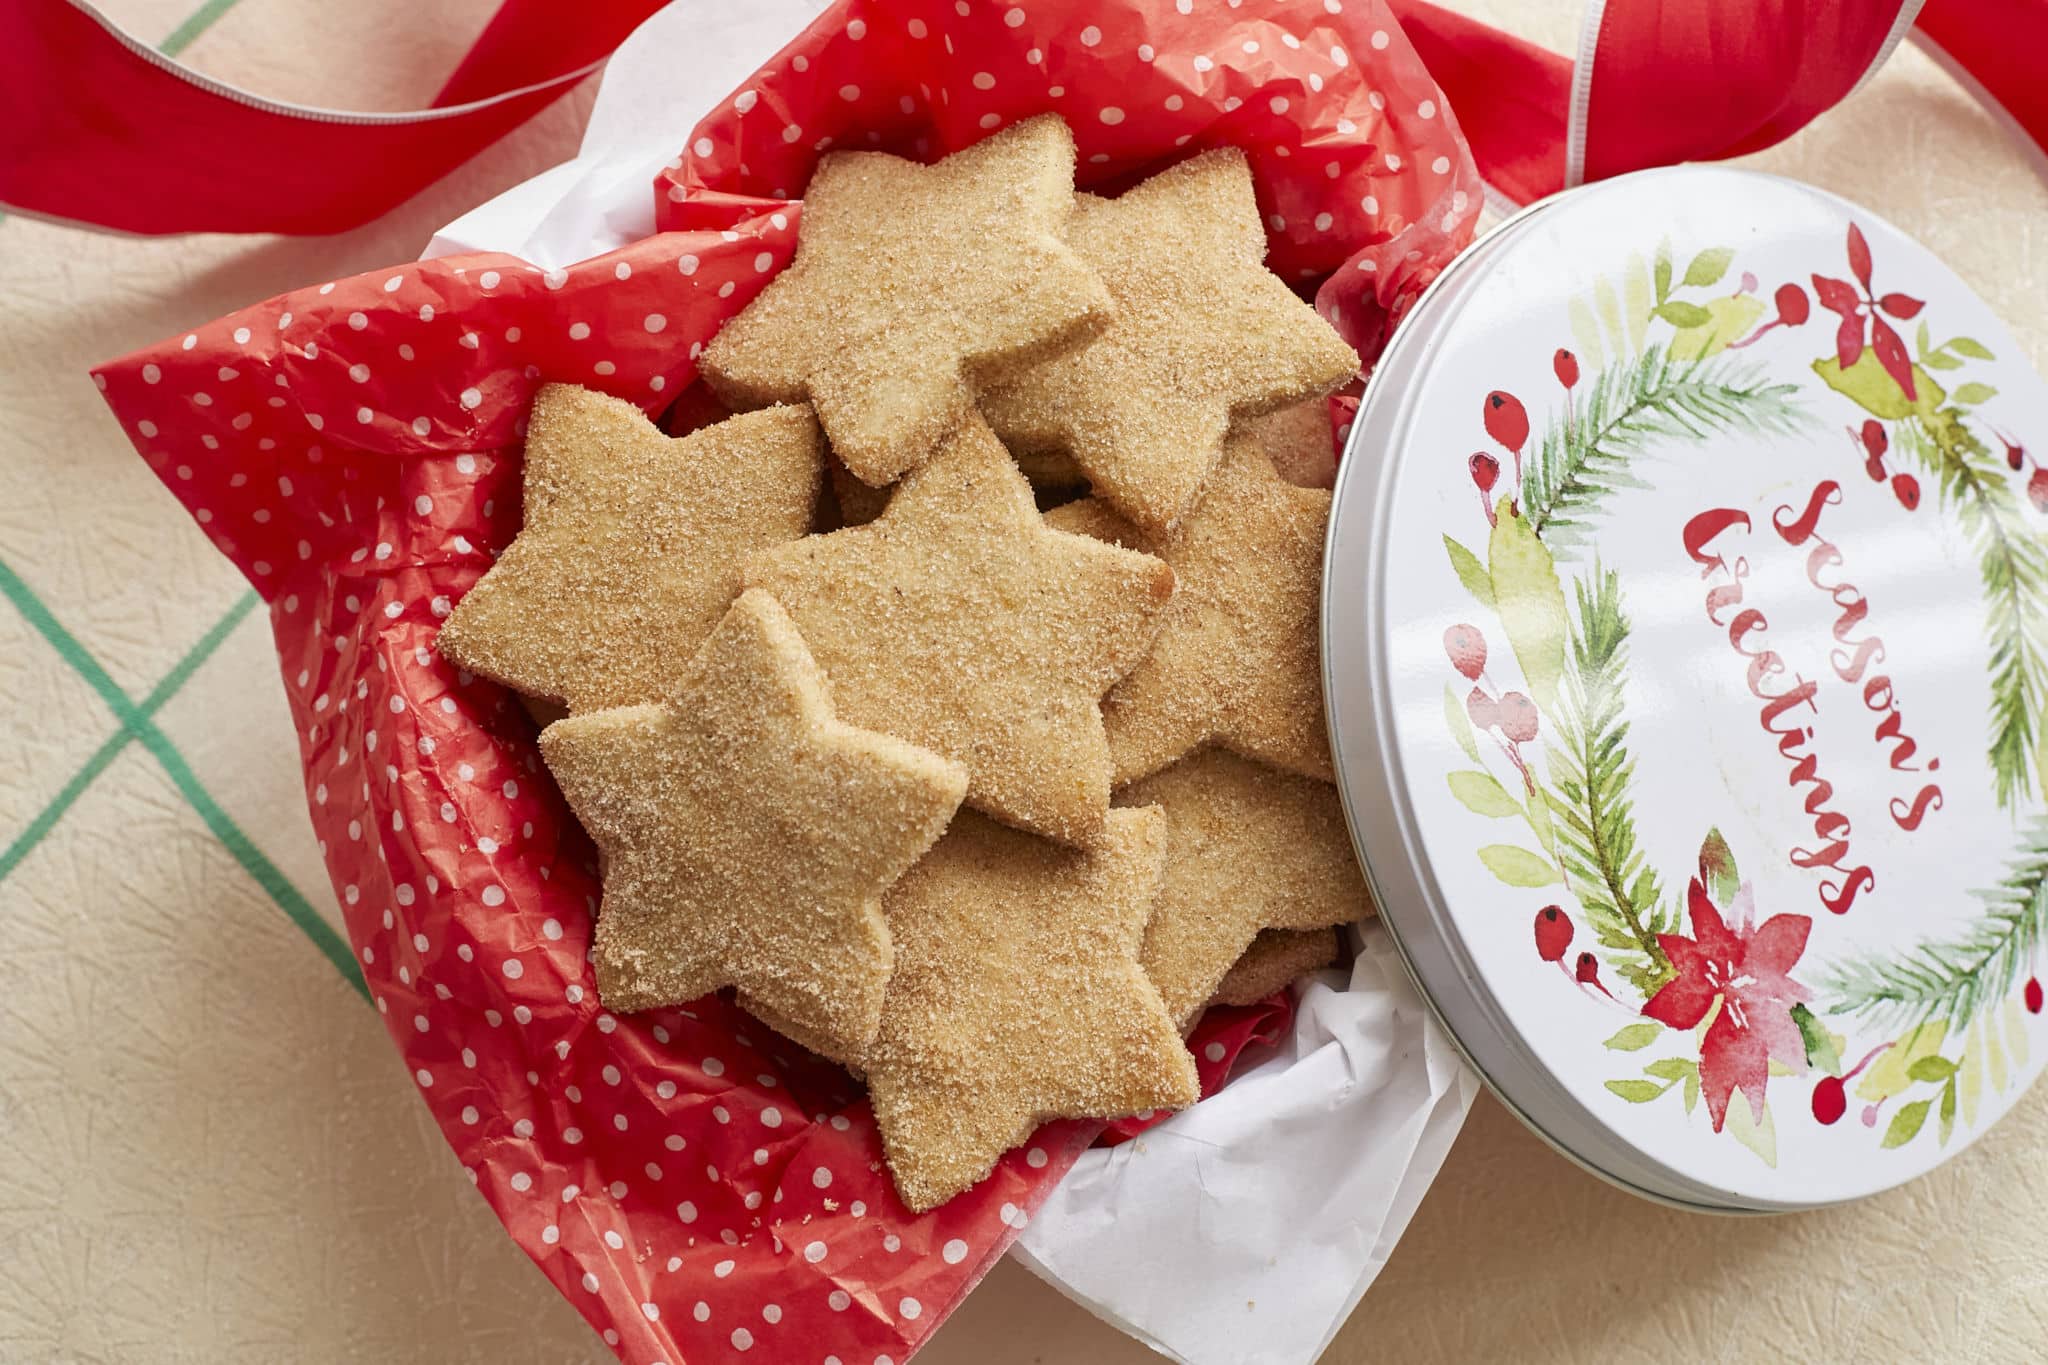 Homemade Biscochitos cut into a star shape and coated in cinnamon sugar are served in a Christmas tin with red tissue paper.